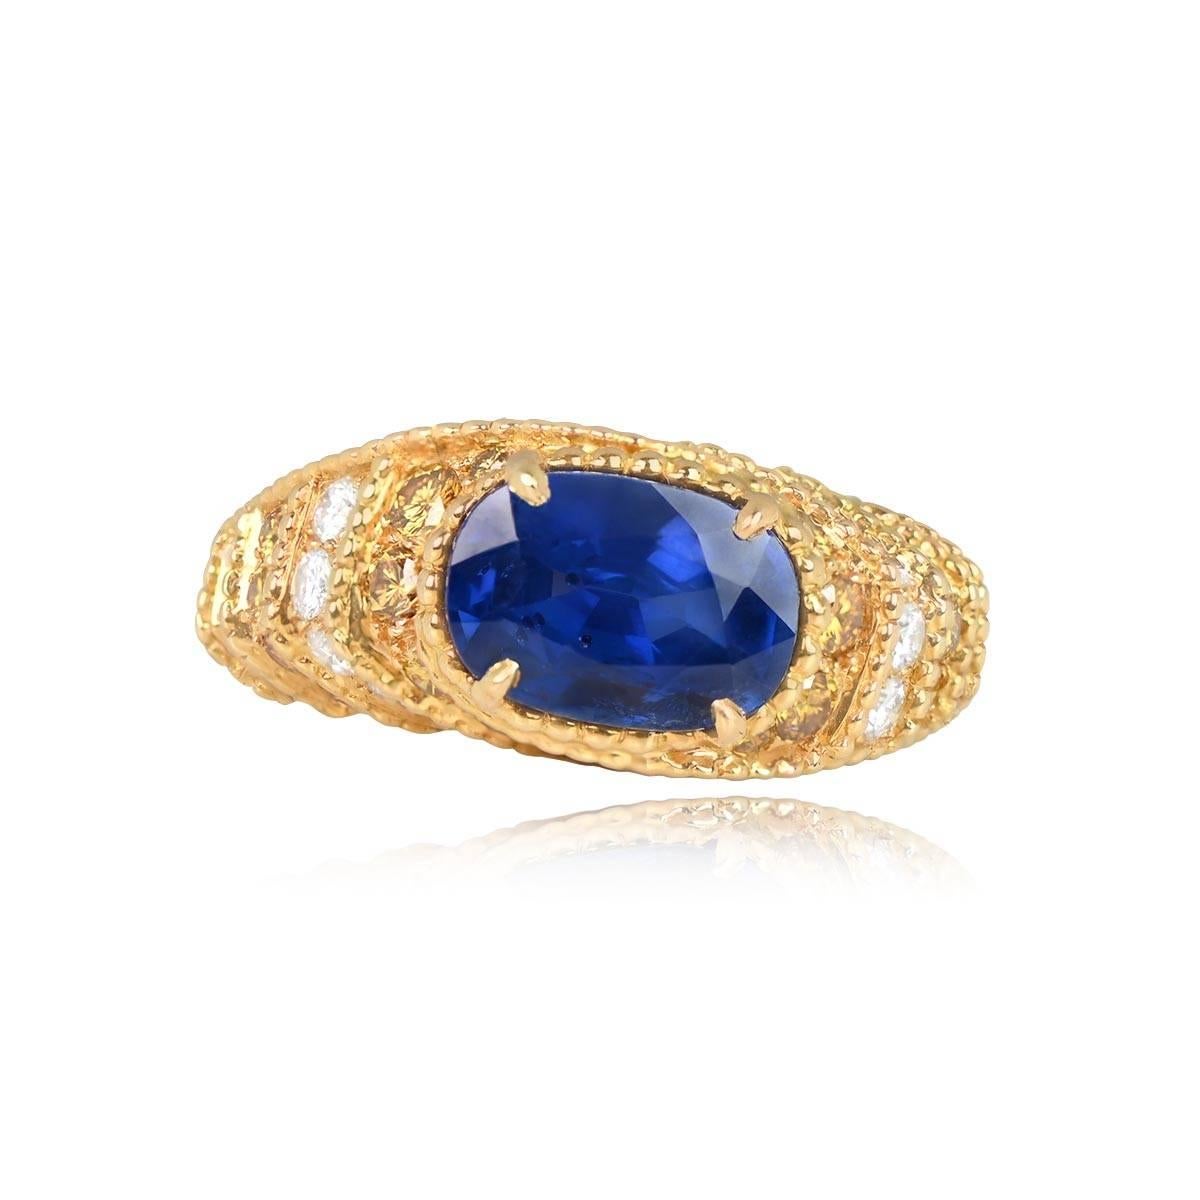 Exquisite vintage ring showcasing a 2.70-carat oval-cut Burma non-heated sapphire at its center, delicately prong-set. Surrounding the sapphire, alternating rows of yellow and white diamonds accented with fine milgrain detailing. The yellow diamonds